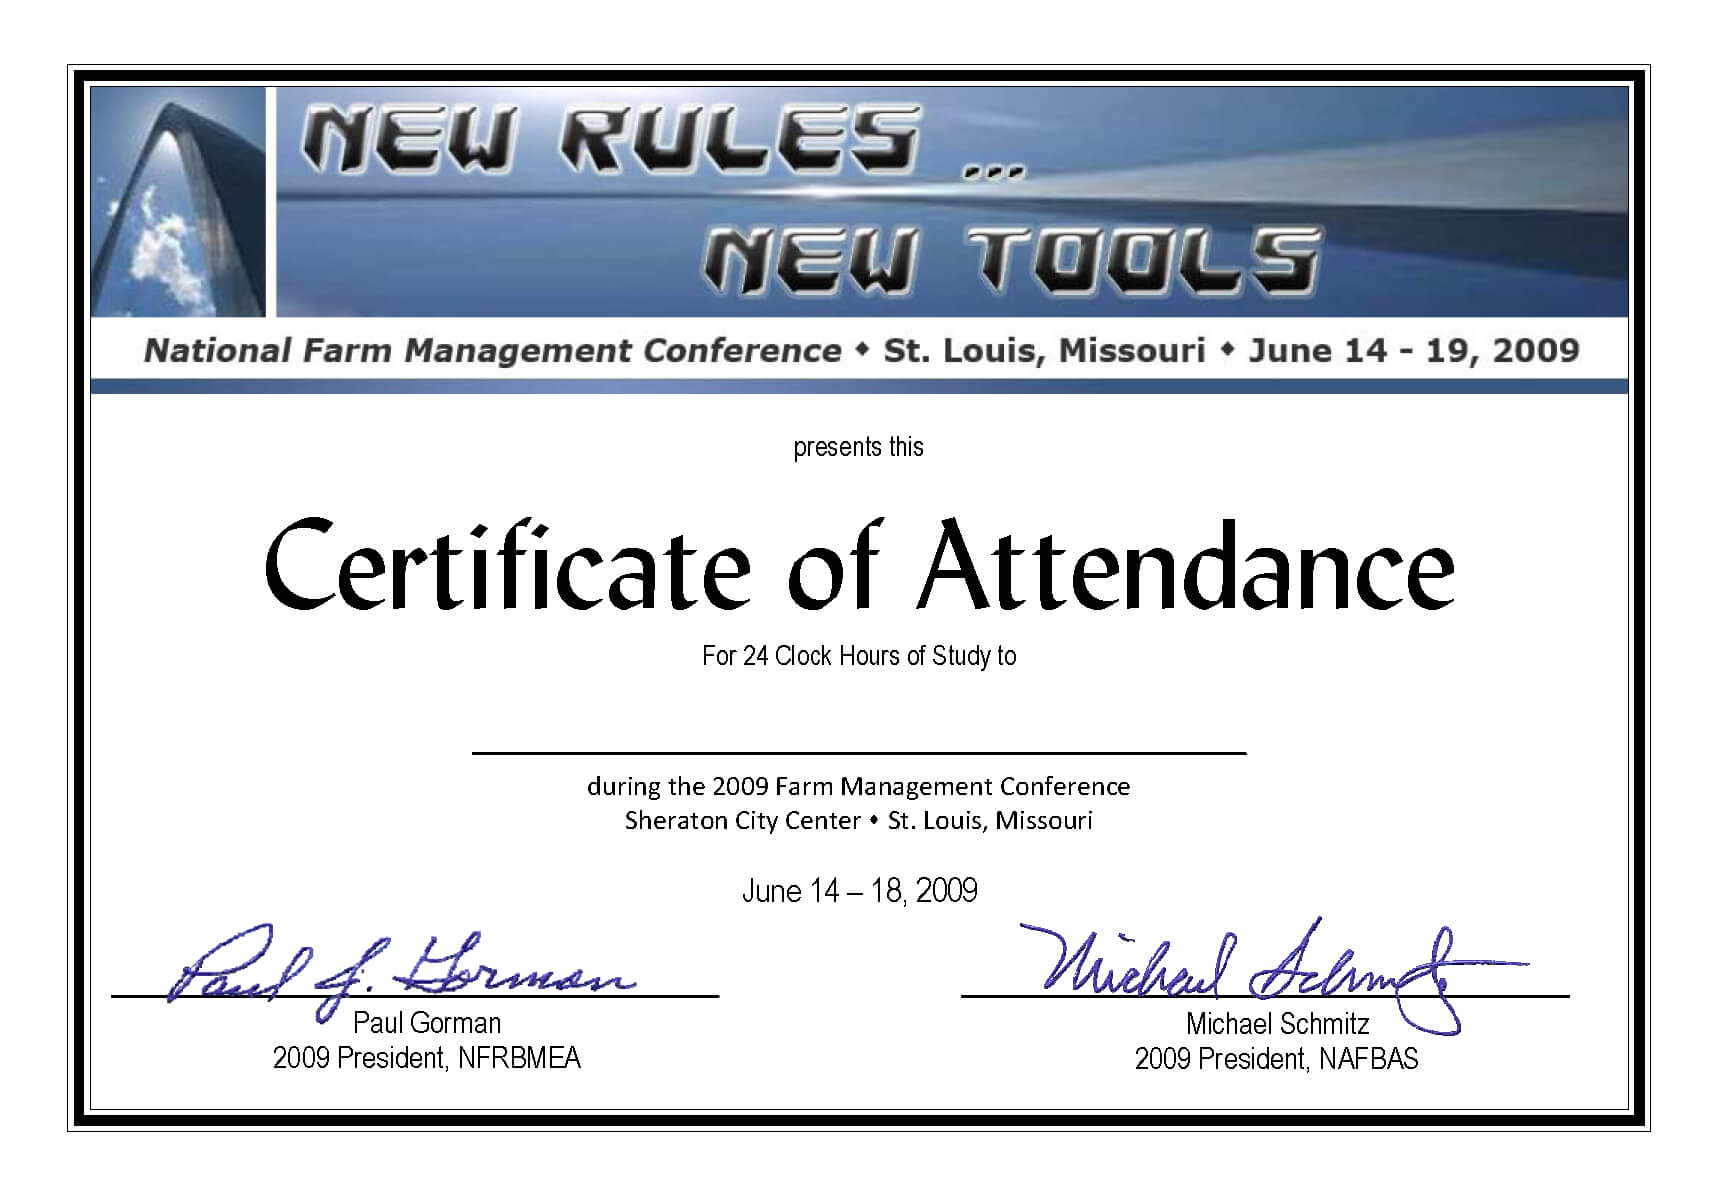 Conference Certificate Of Attendance Template - Great Regarding Conference Certificate Of Attendance Template